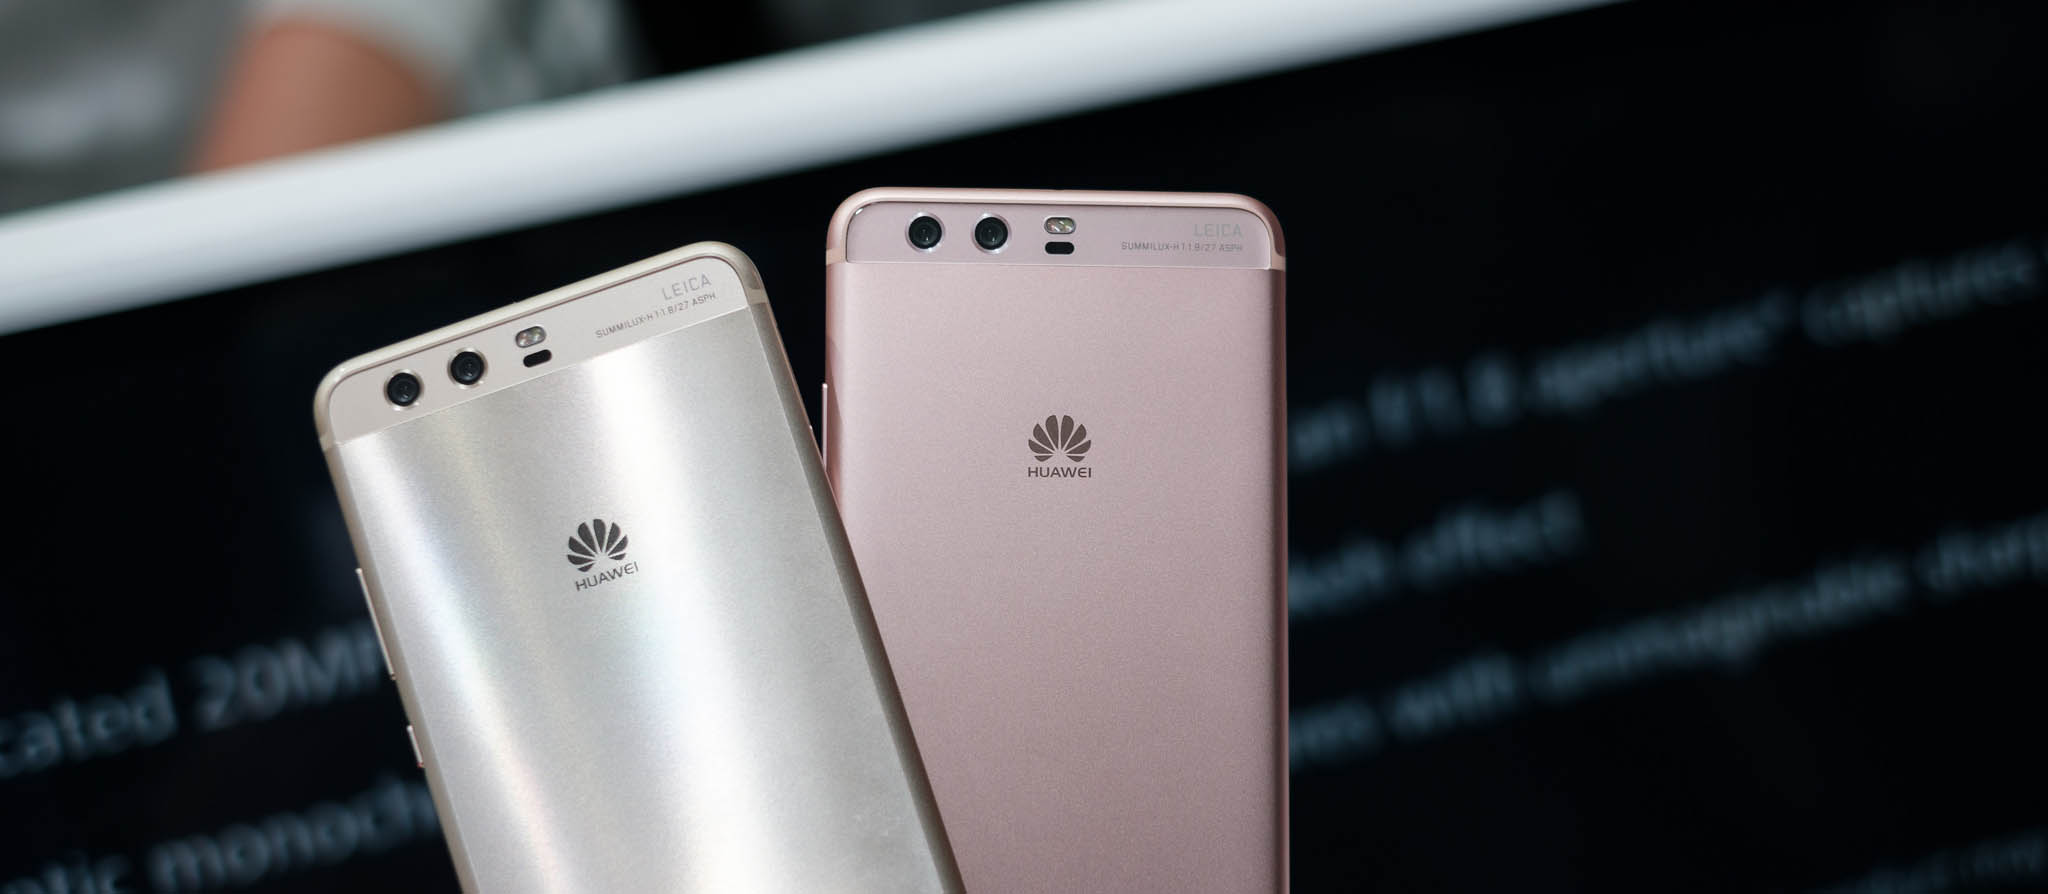 alternativa a Android Huawei